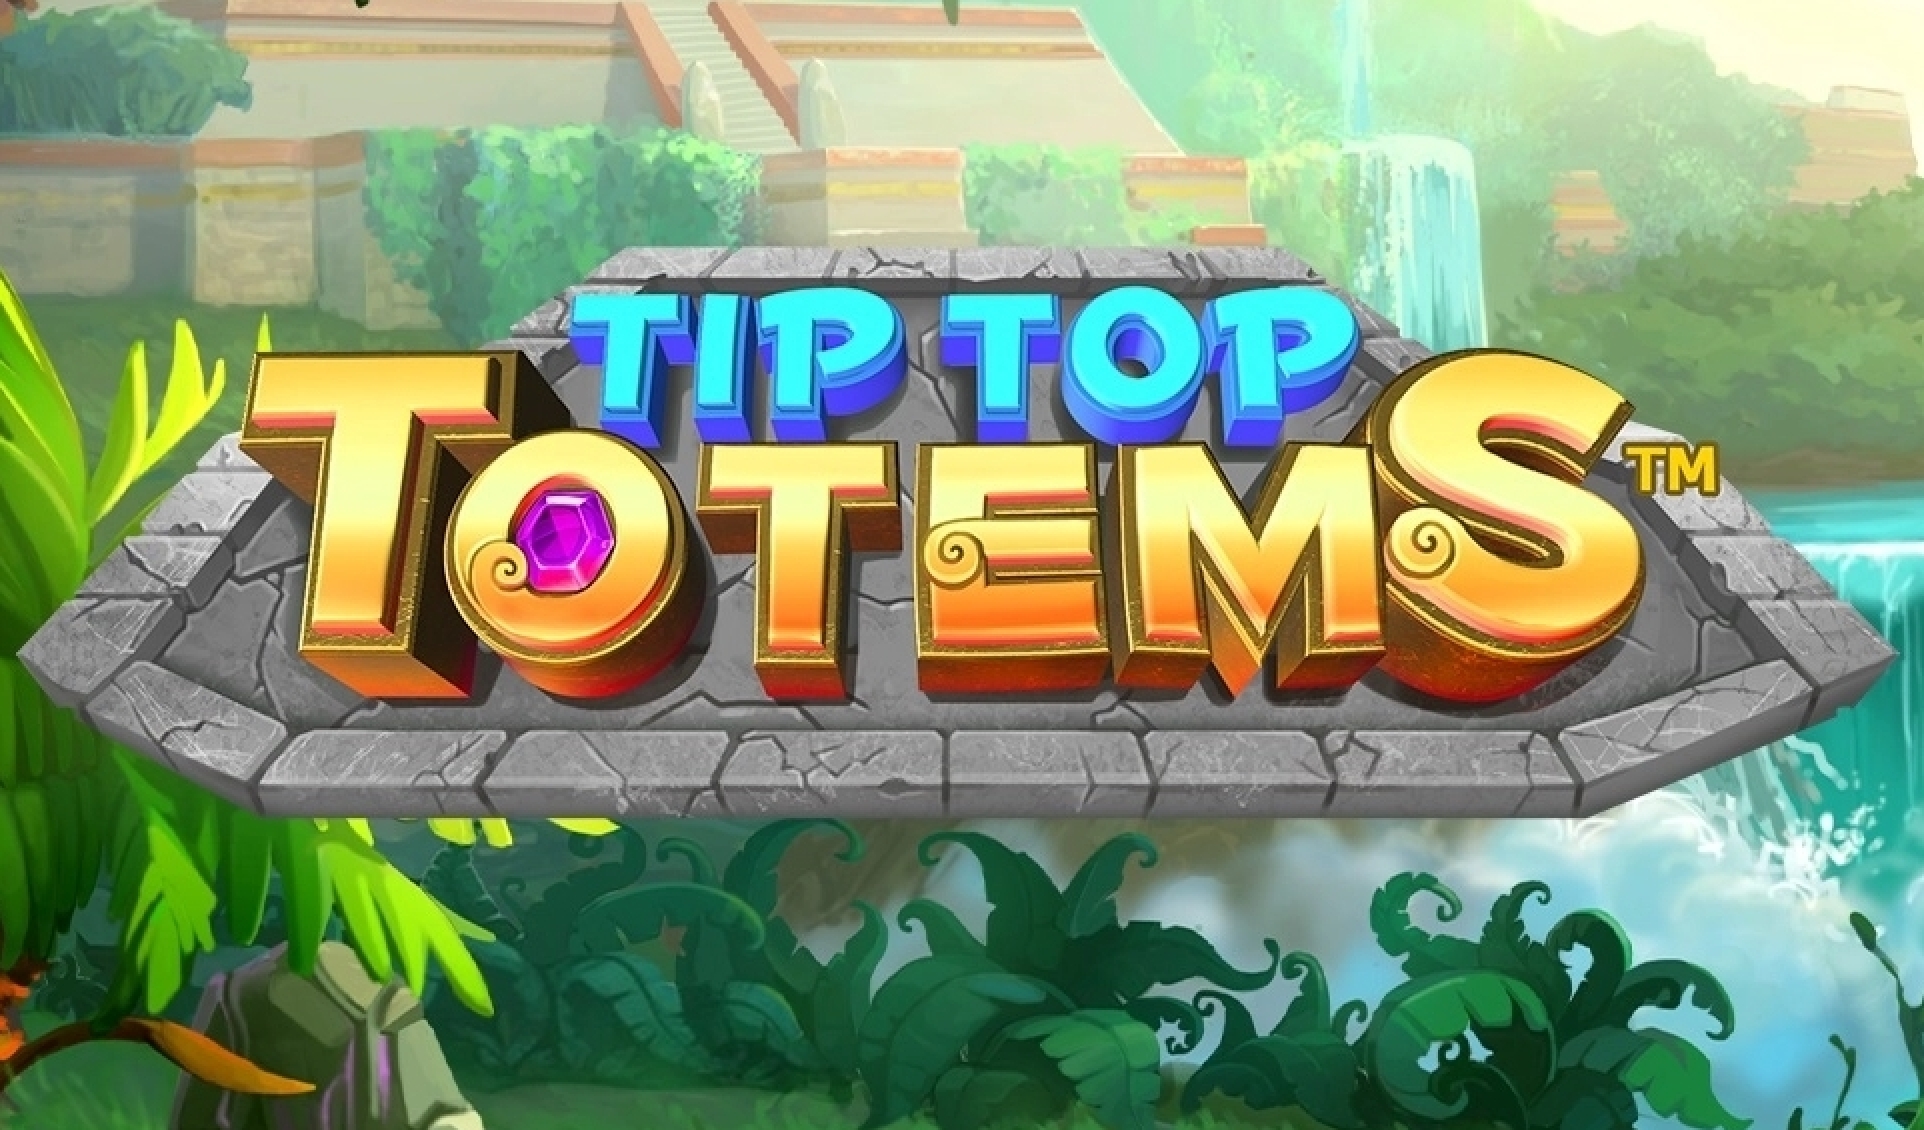 Tip Top Totems demo